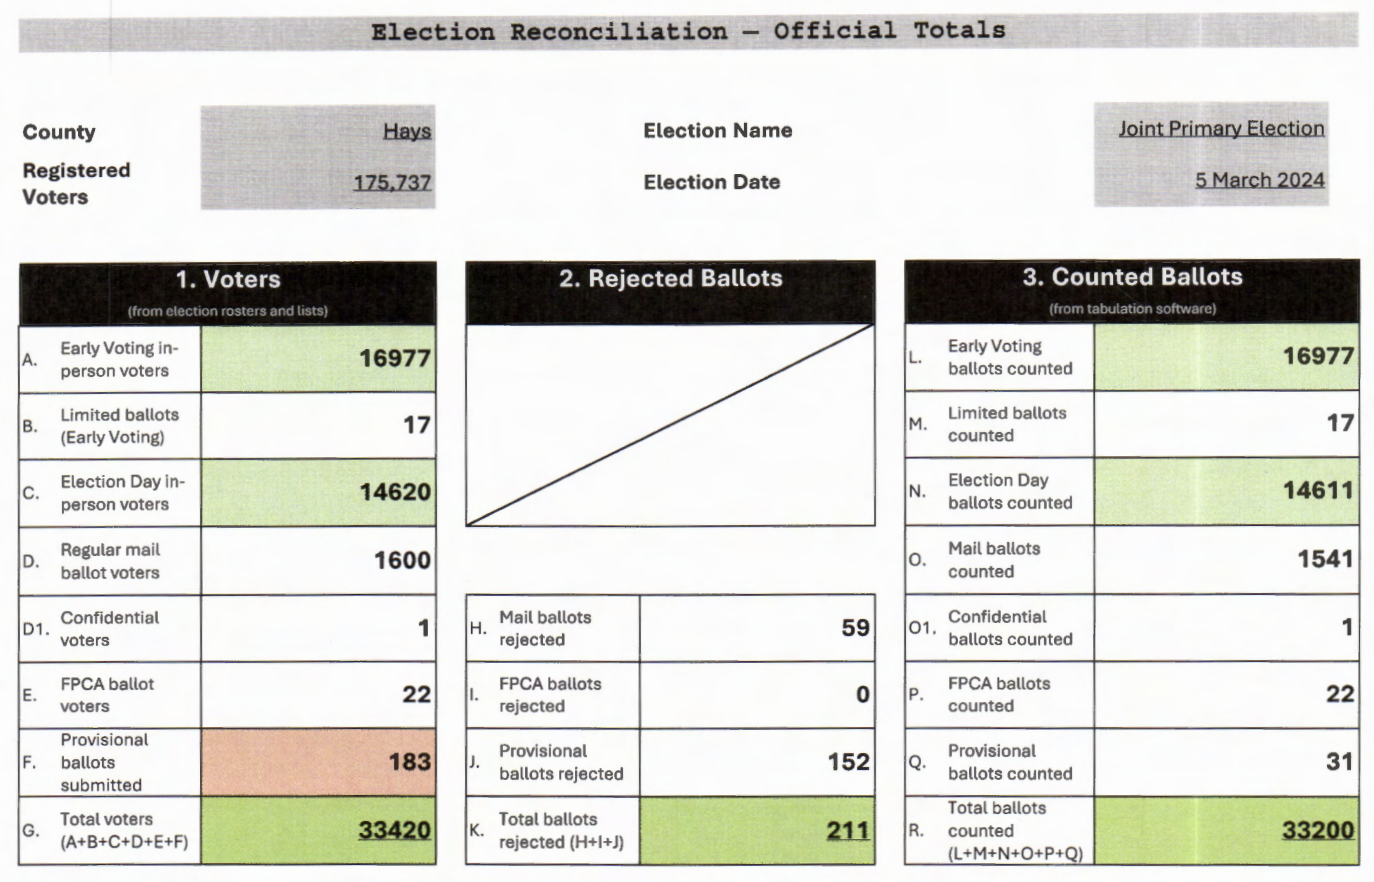 Image of the 2024 Election Reconciliation Official Total for Hays County